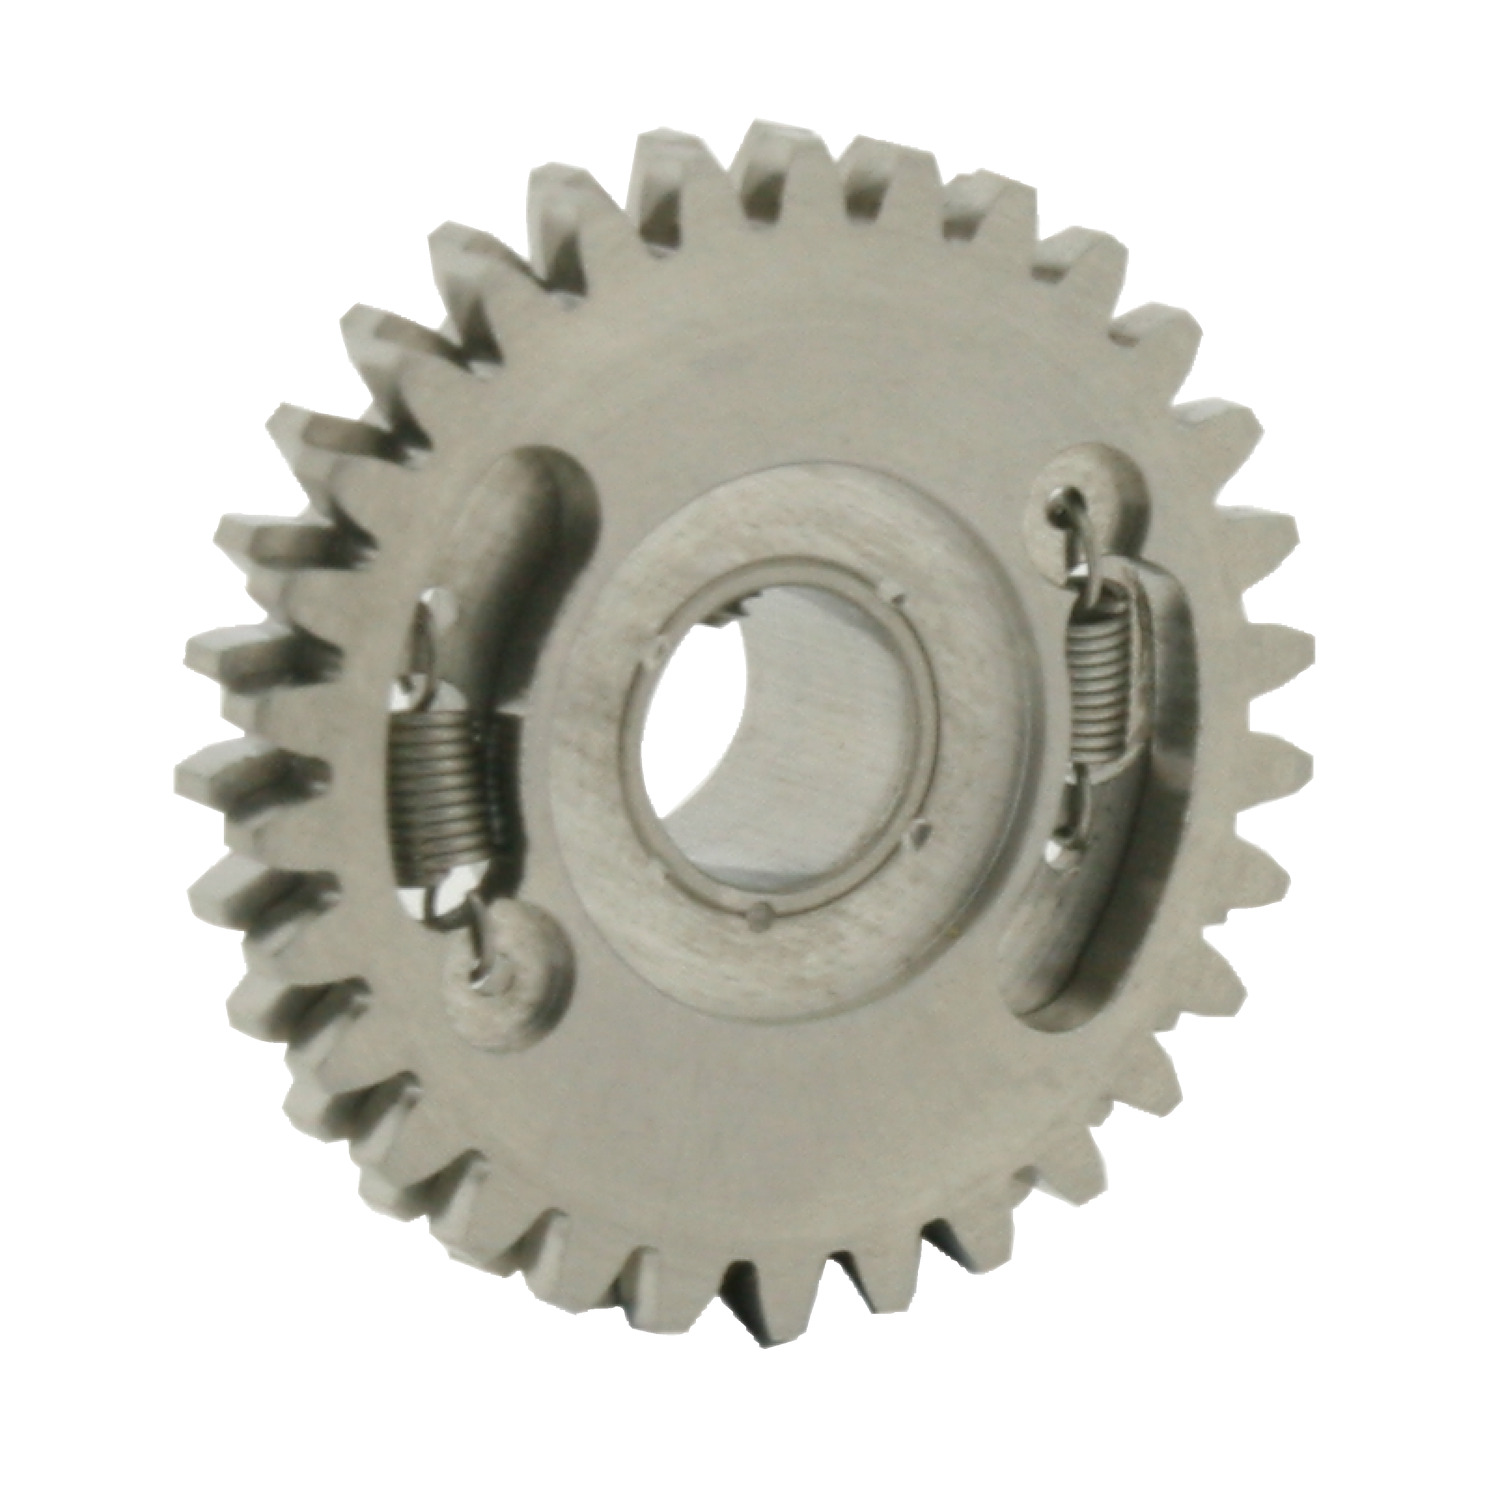 Product R2086, Hubless Spur Gears Stainless Steel / 